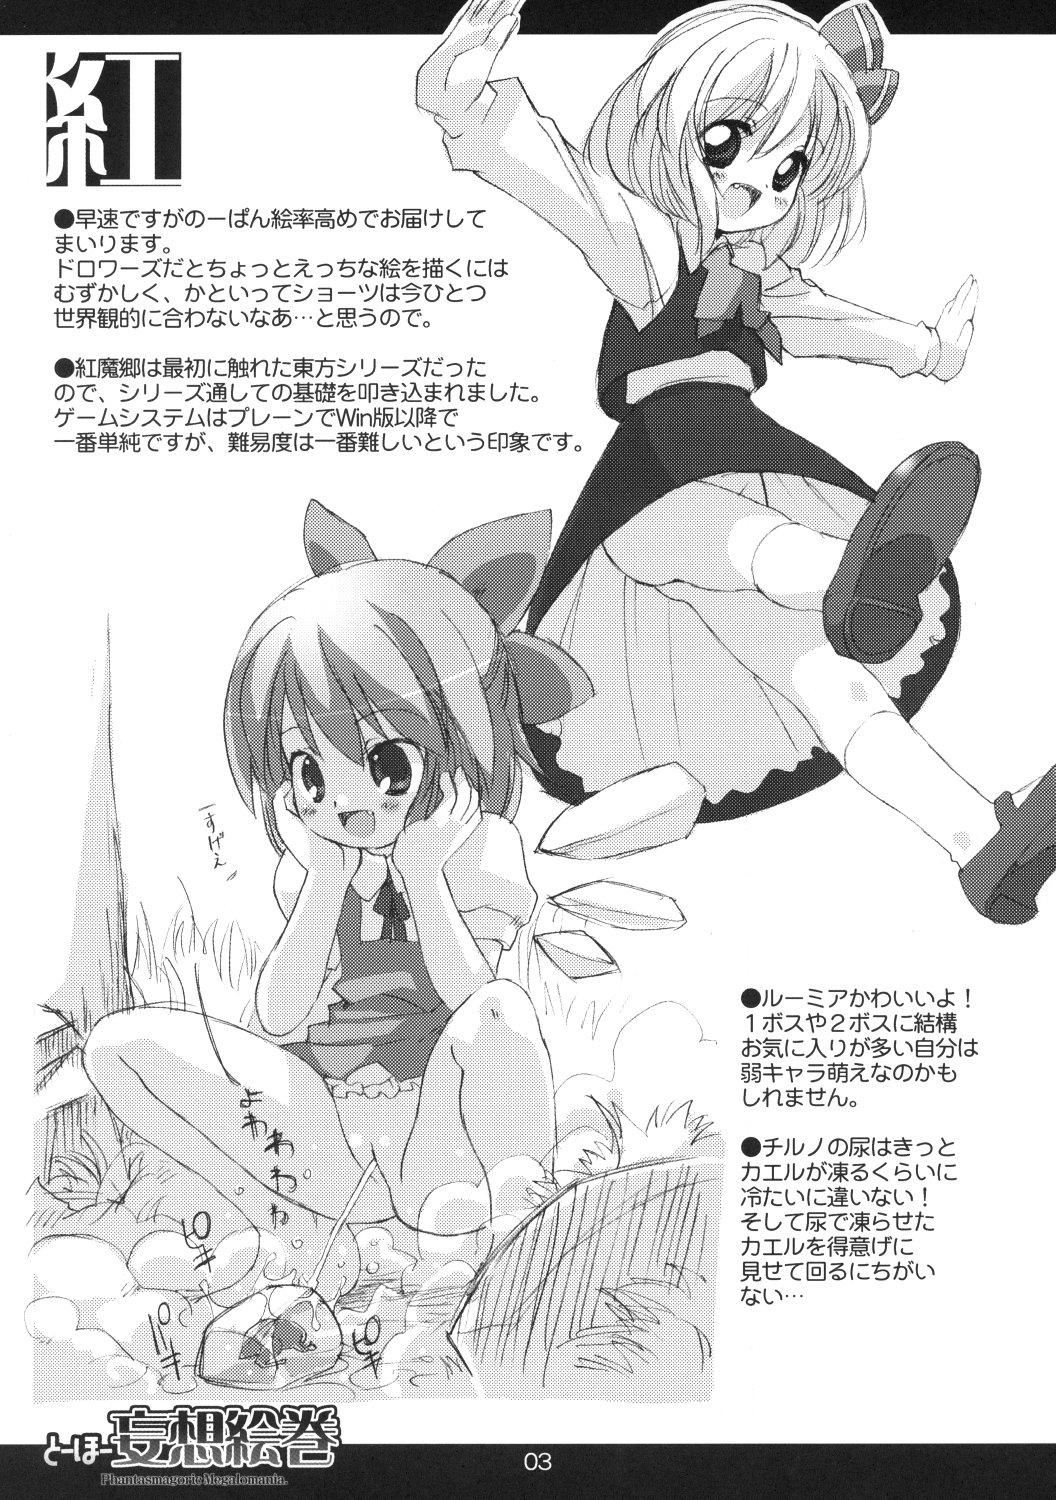 Salope Touhou Mousou Emaki - Touhou project Chat - Page 4